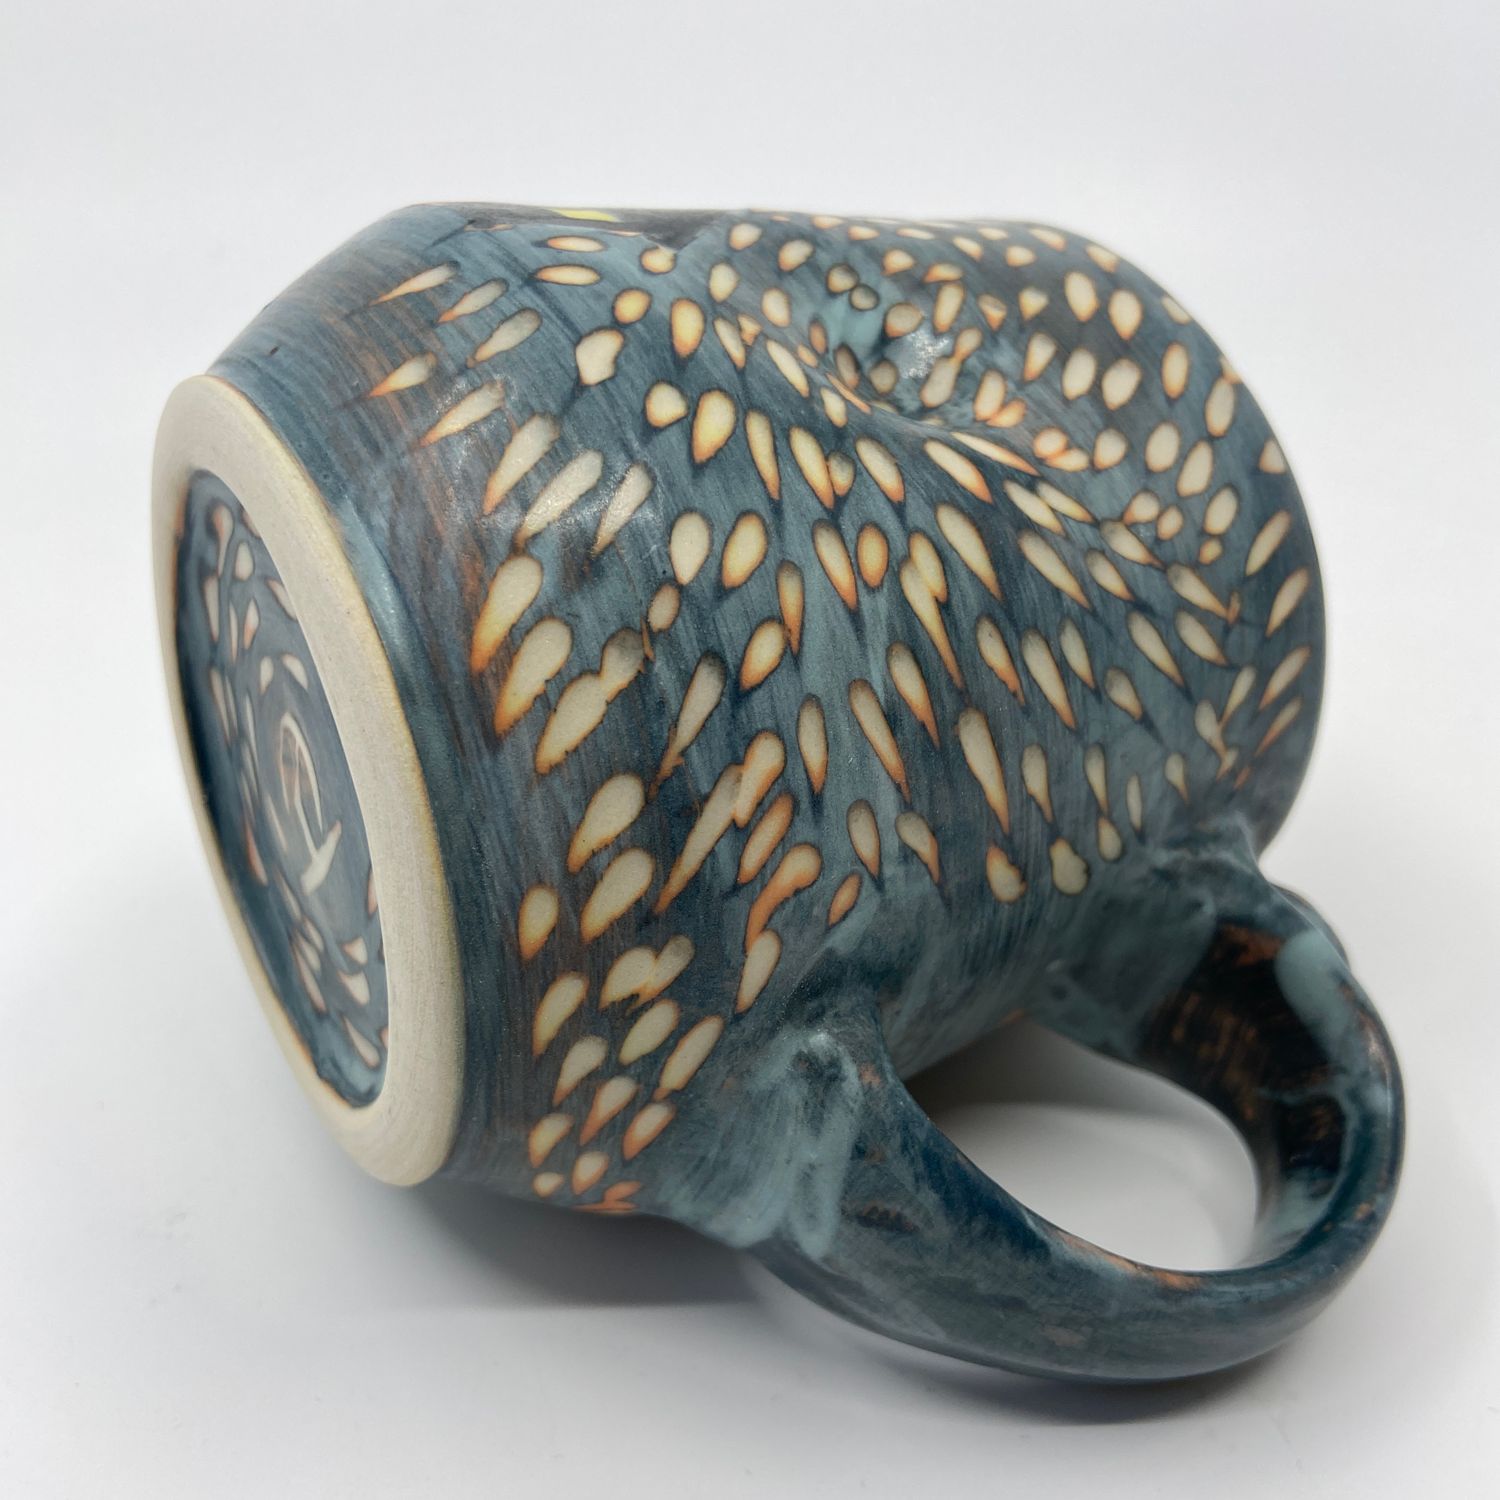 Teresa Dunlop: Carved Belly Button Mug with House Motif Product Image 3 of 3